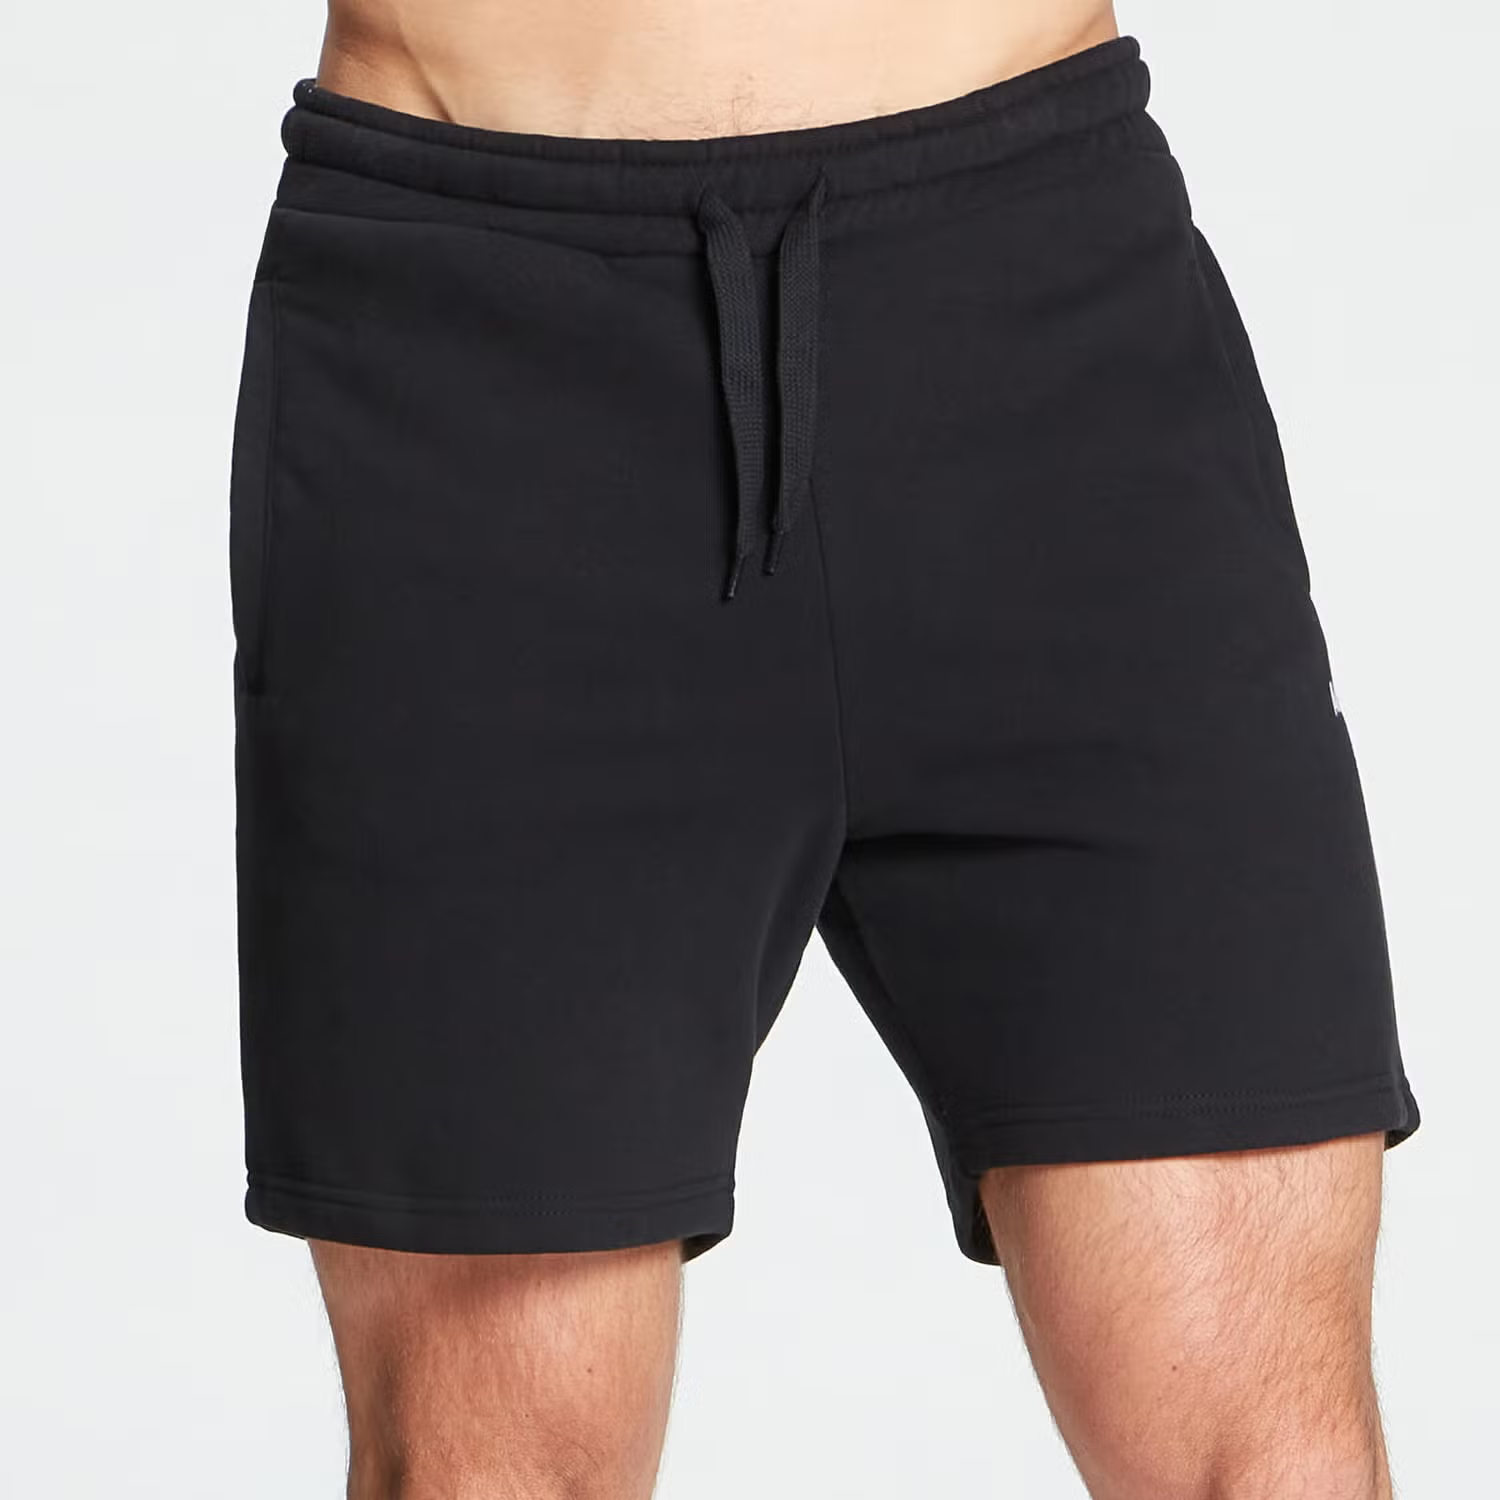 Best men's casual shorts, as summer approaches, many men may be looking for new ways to style their casual shorts.